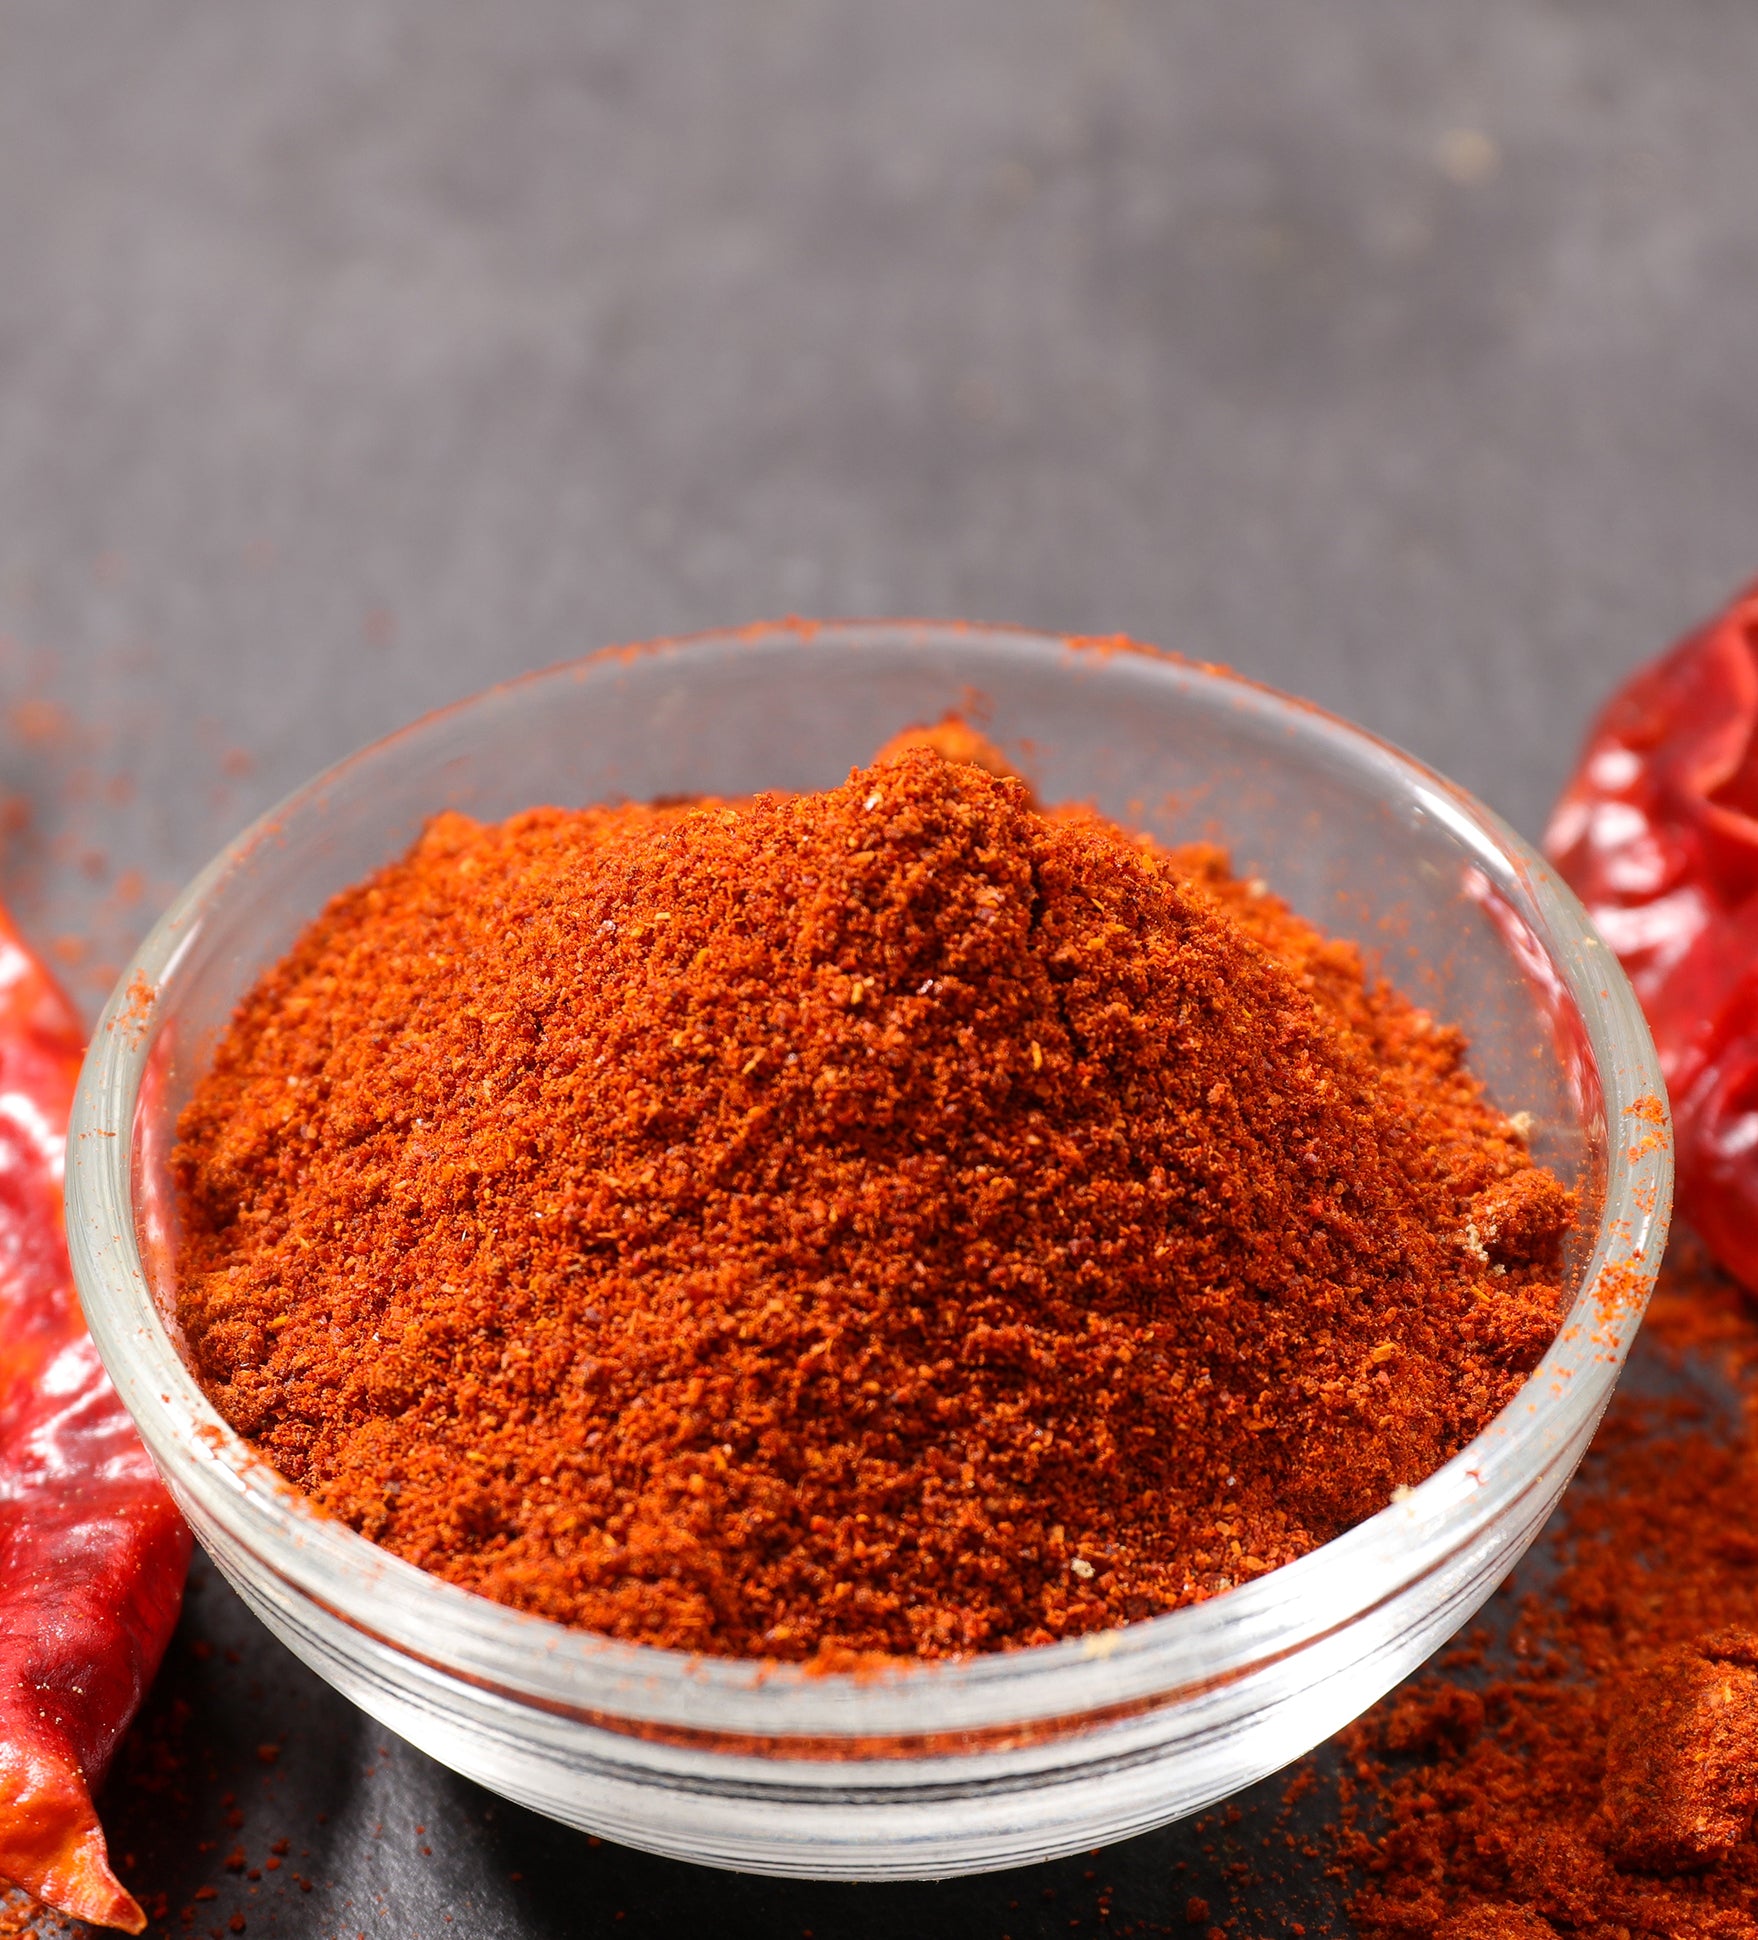 A close-up shot of a bowl of paprika powder, and vibrant red paprika peppers against a grey background with a focus on its textured surface and stem.